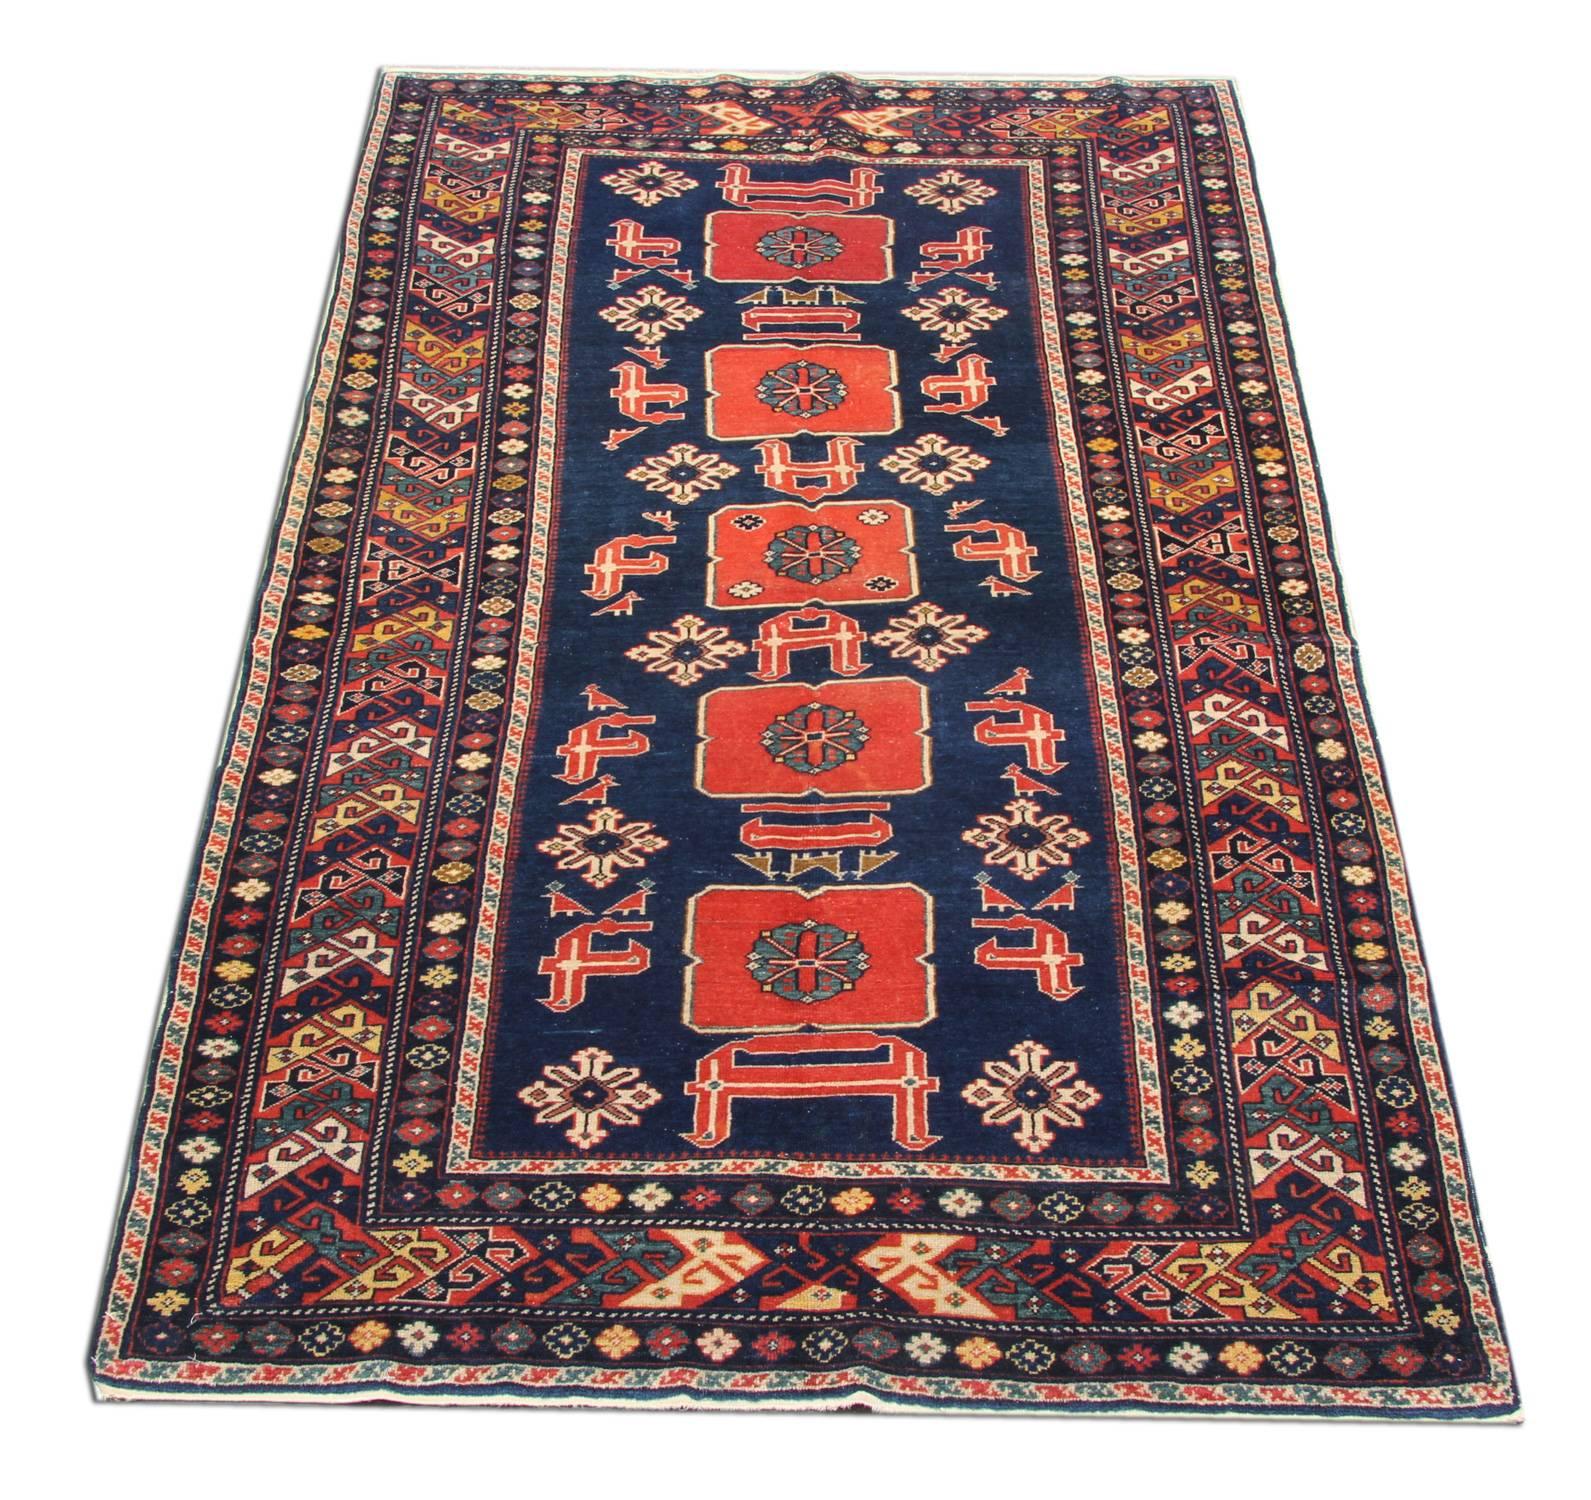 This handmade carpet handsome antique Caucasian rug is a phenomenal and truly archetypal example of regional oriental rugs from the Azerbaijani village of Karakashly. This local variant of the Afshan pattern features crimson calyces with right-angle